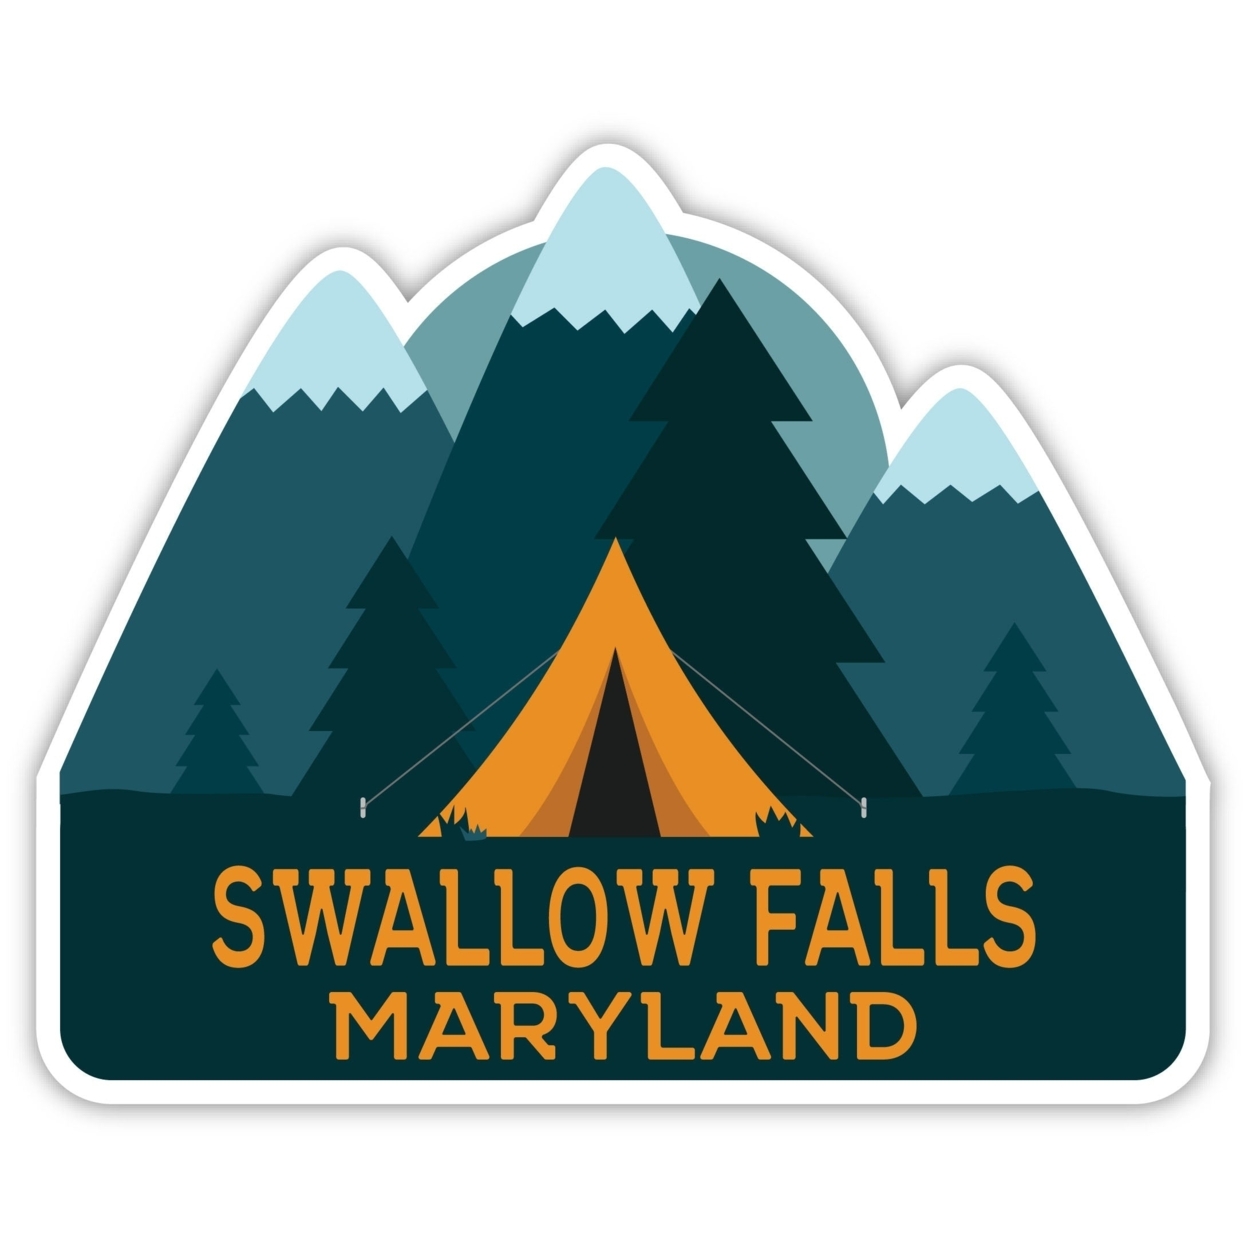 Swallow Falls Maryland Souvenir Decorative Stickers (Choose Theme And Size) - Single Unit, 2-Inch, Tent